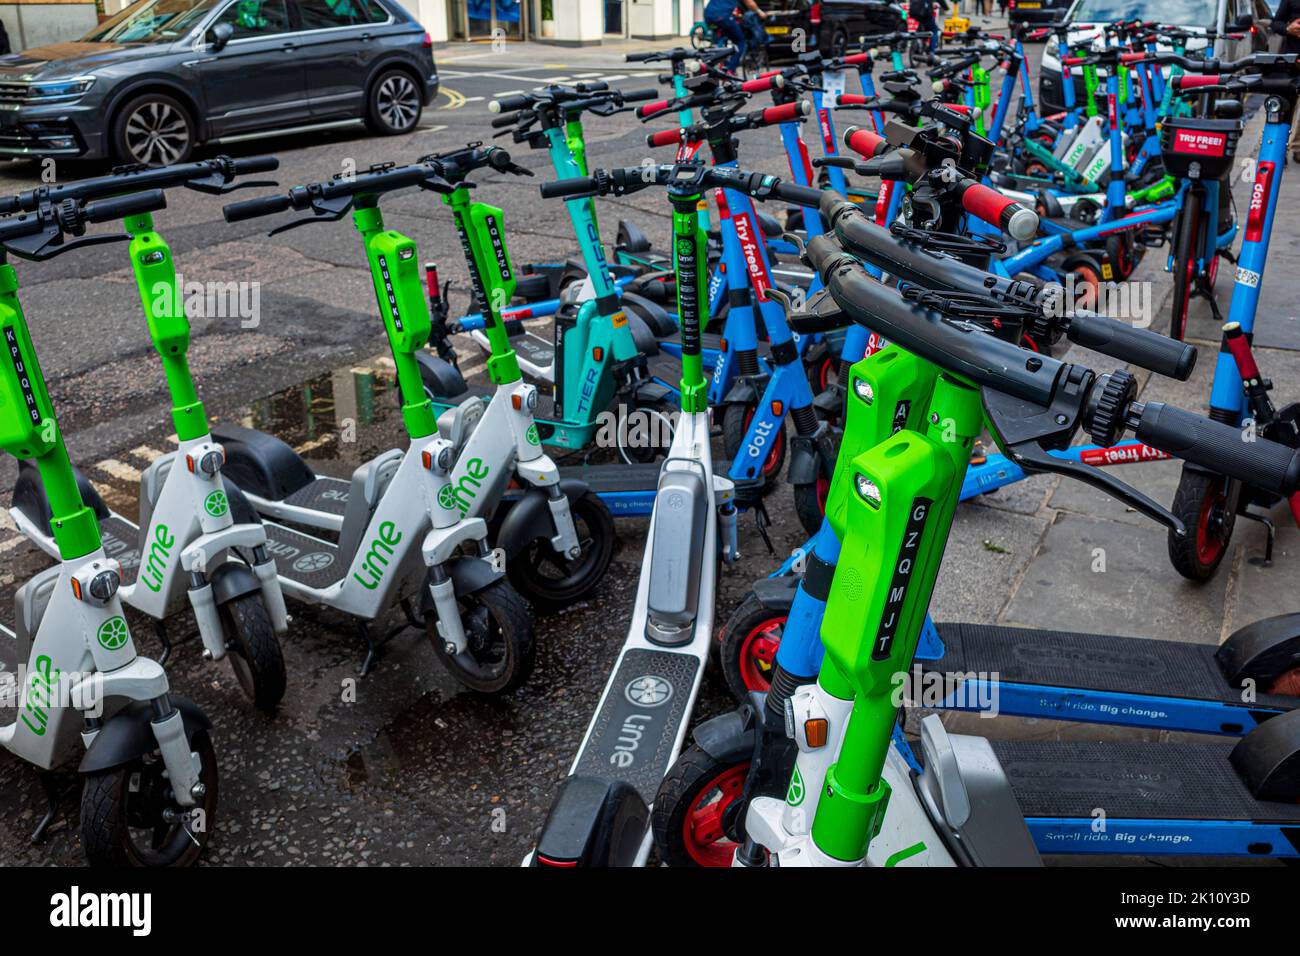 E-Scooter Congestion London - E-Scooters London - E-Scooters parked in designated space in Central London. Approved E-Scooters for hire in London. Stock Photo